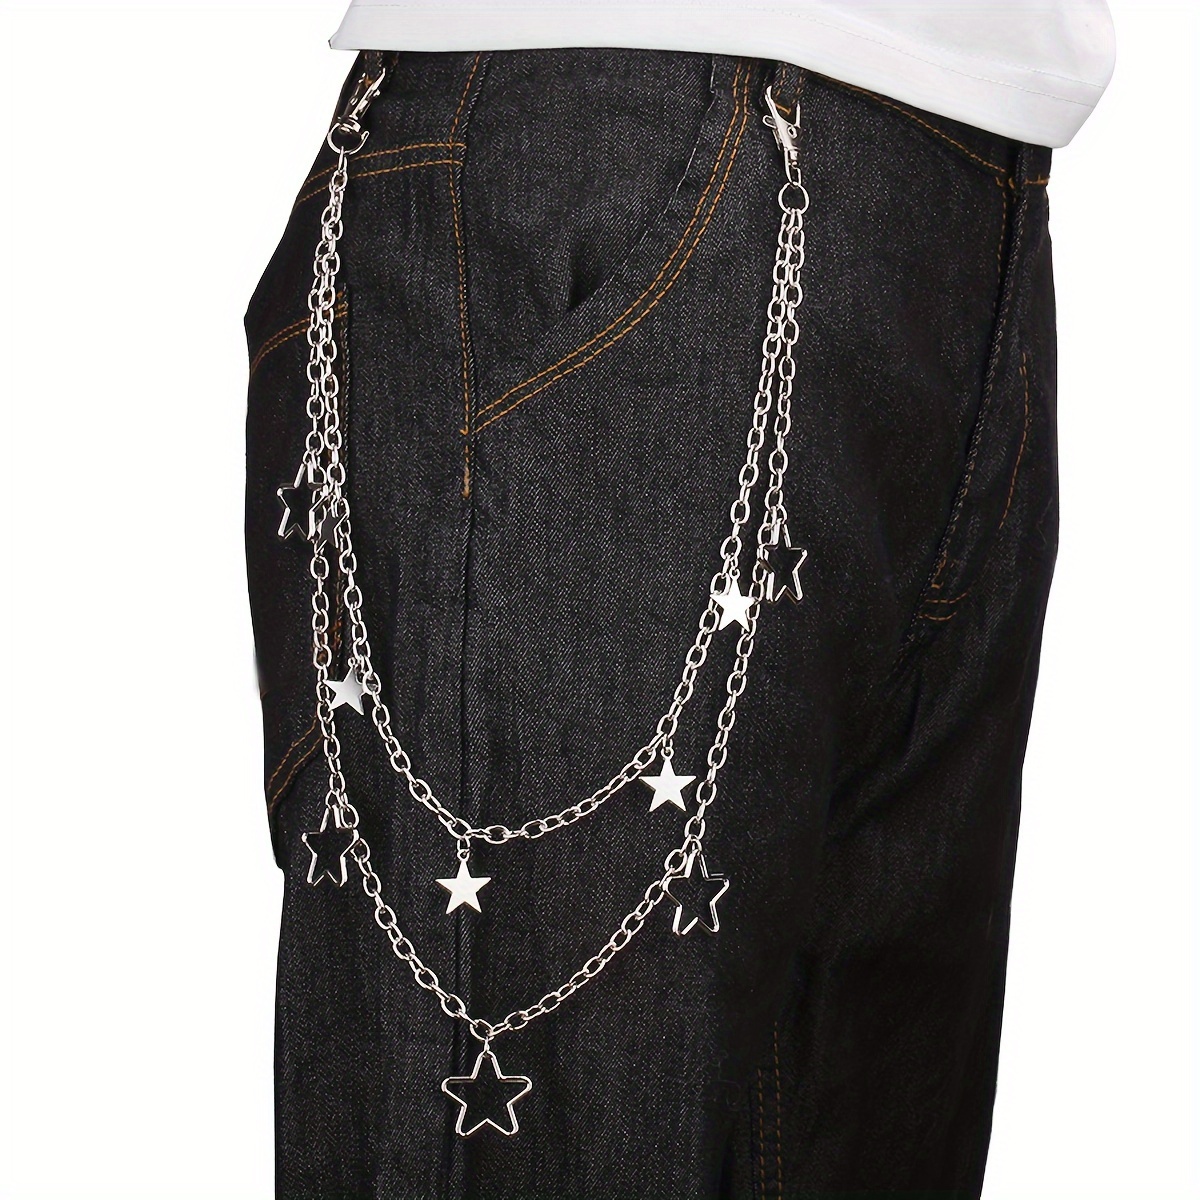 1pc Skull Chains Mens Decorative Pant Chain Jeans Waist Chains Multi Layer  Chain Pocket Chain Hip Hop Rock Chain Punk Gothic Belt Chain Trouser Chain  Ideal Choice For Gifts - Jewelry 